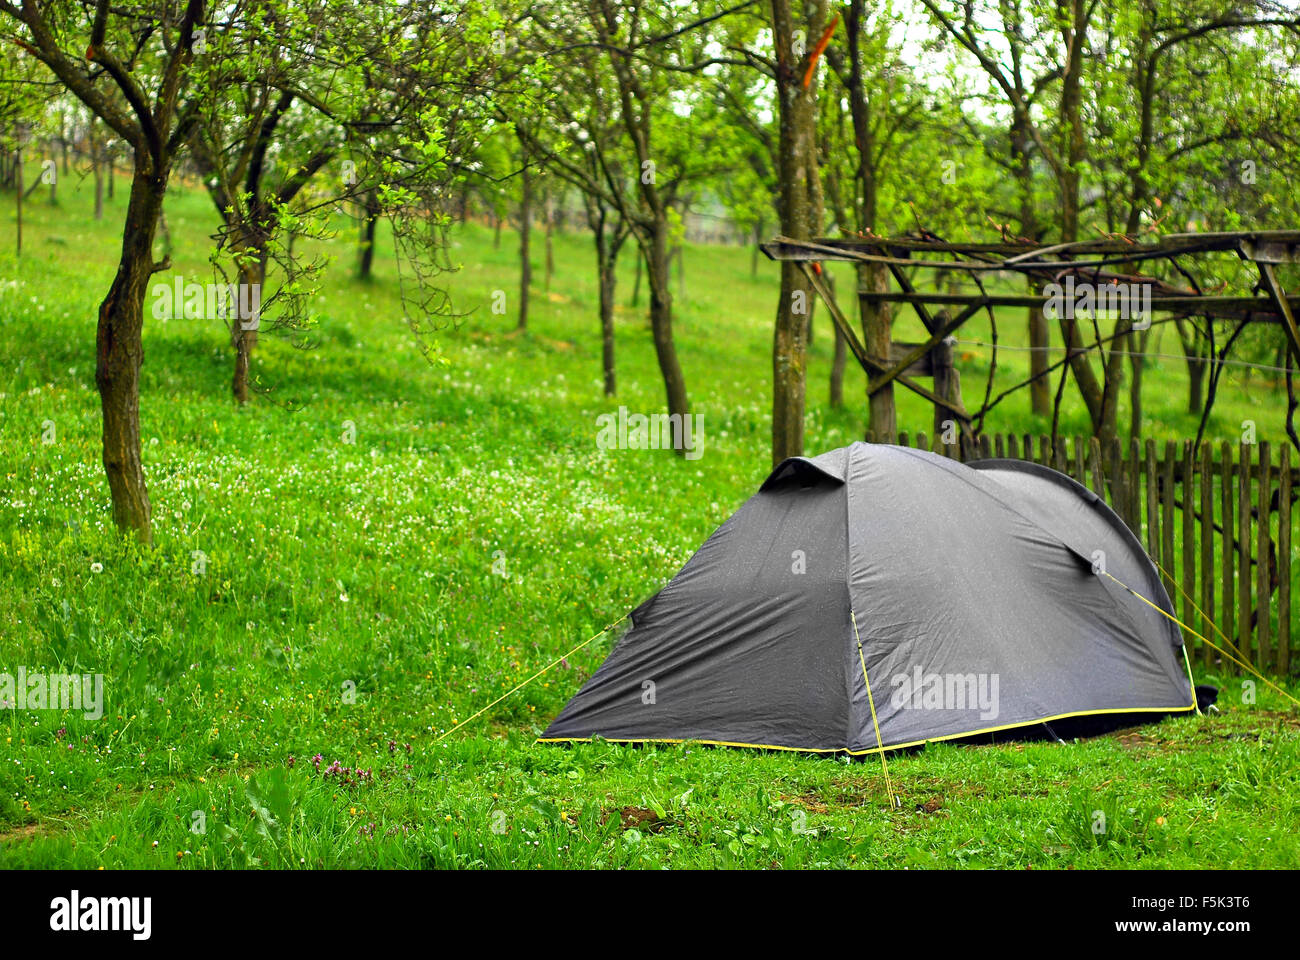 eco tourism, camping in the countryside Stock Photo